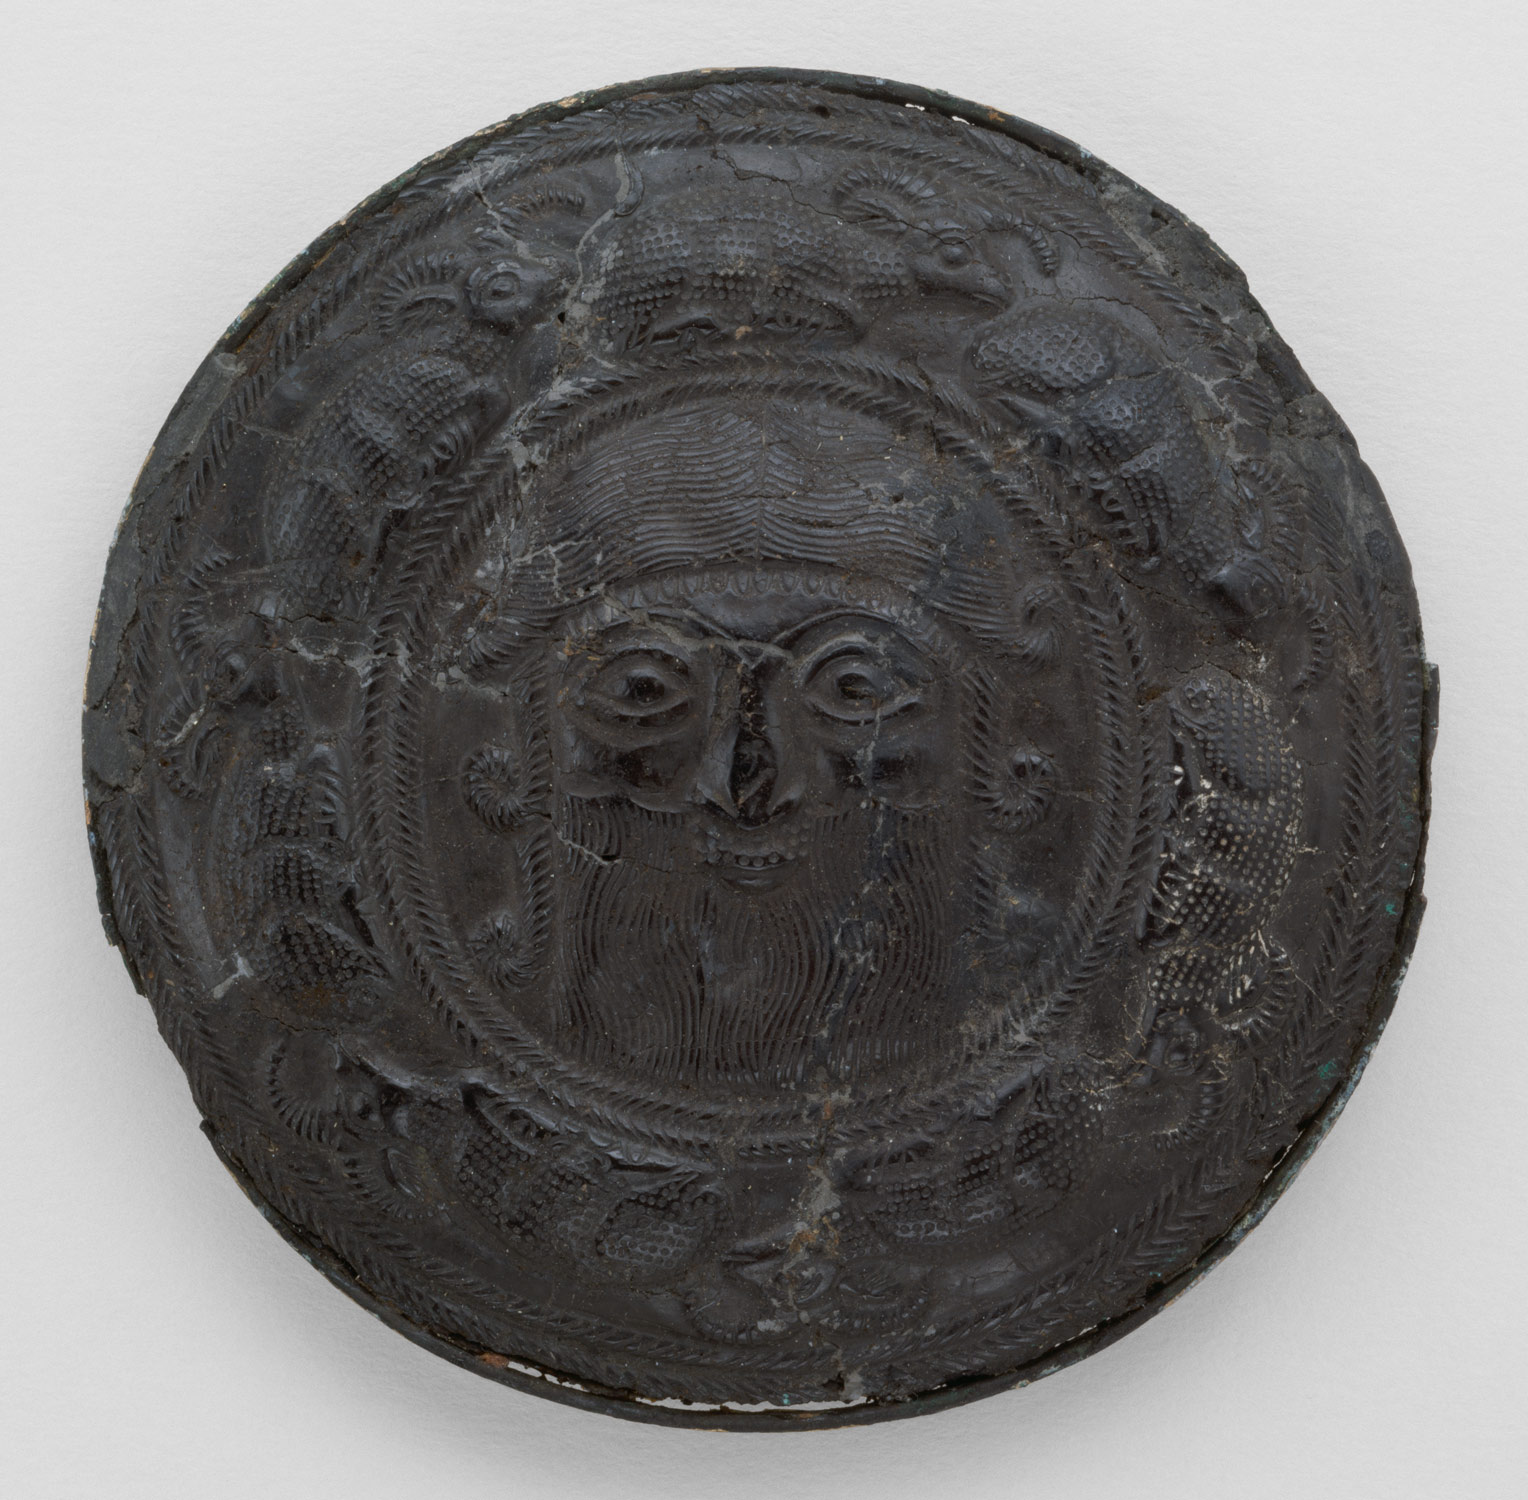 Roundel with the head of a hero surrounded by caprids